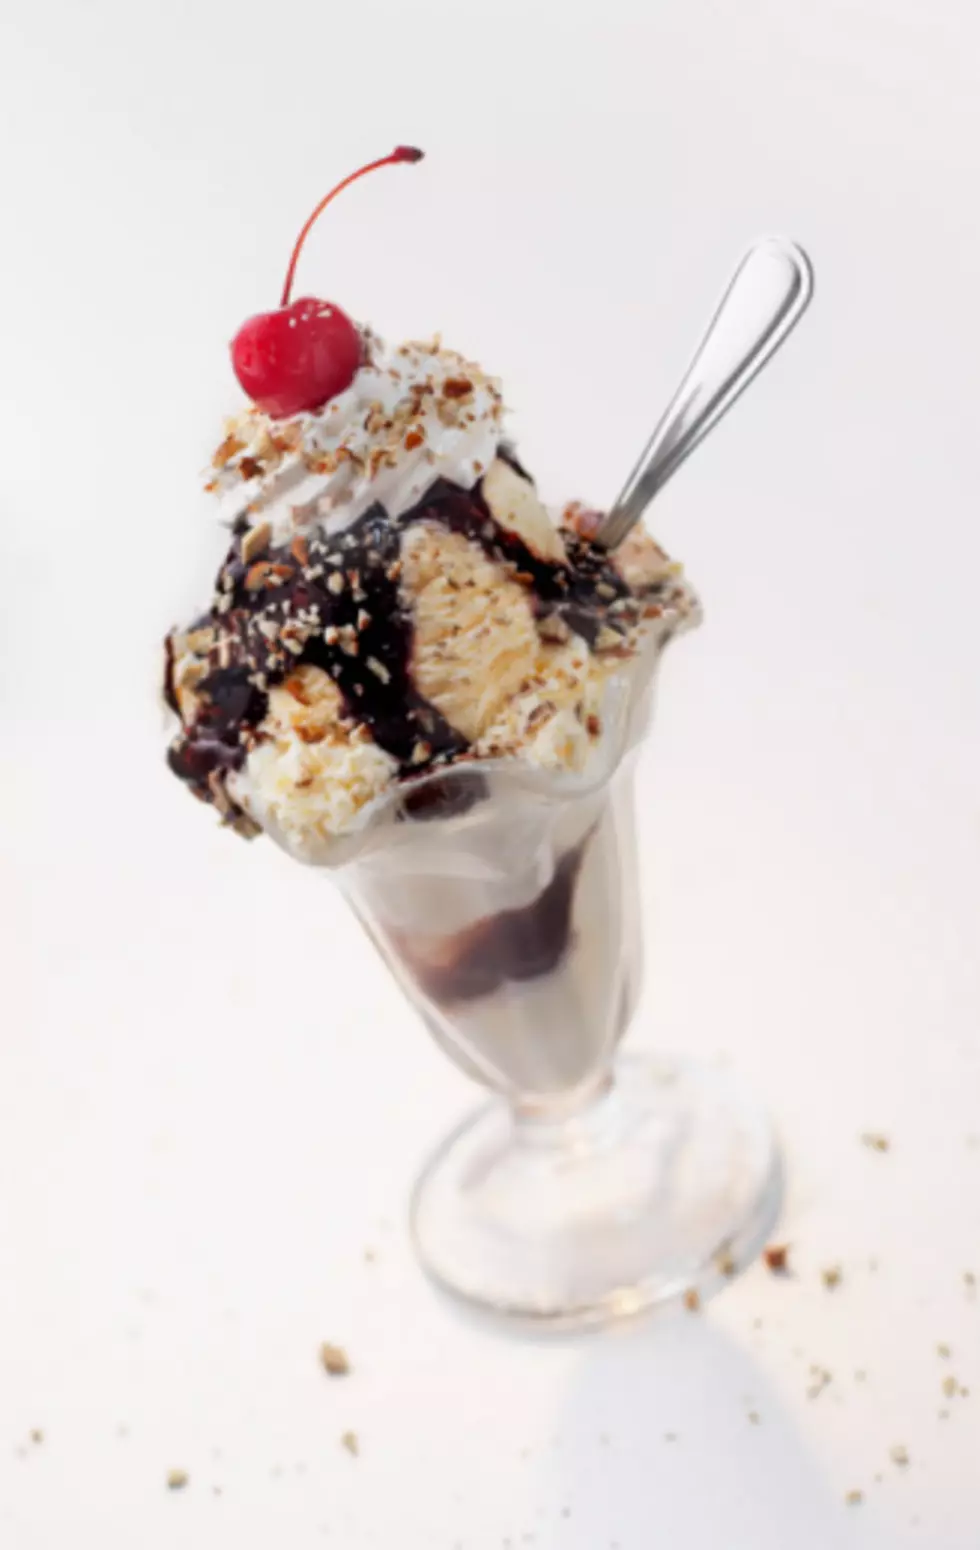 Man Outraged That His Sundae Had Fudge on the Bottom- Say “What!?”